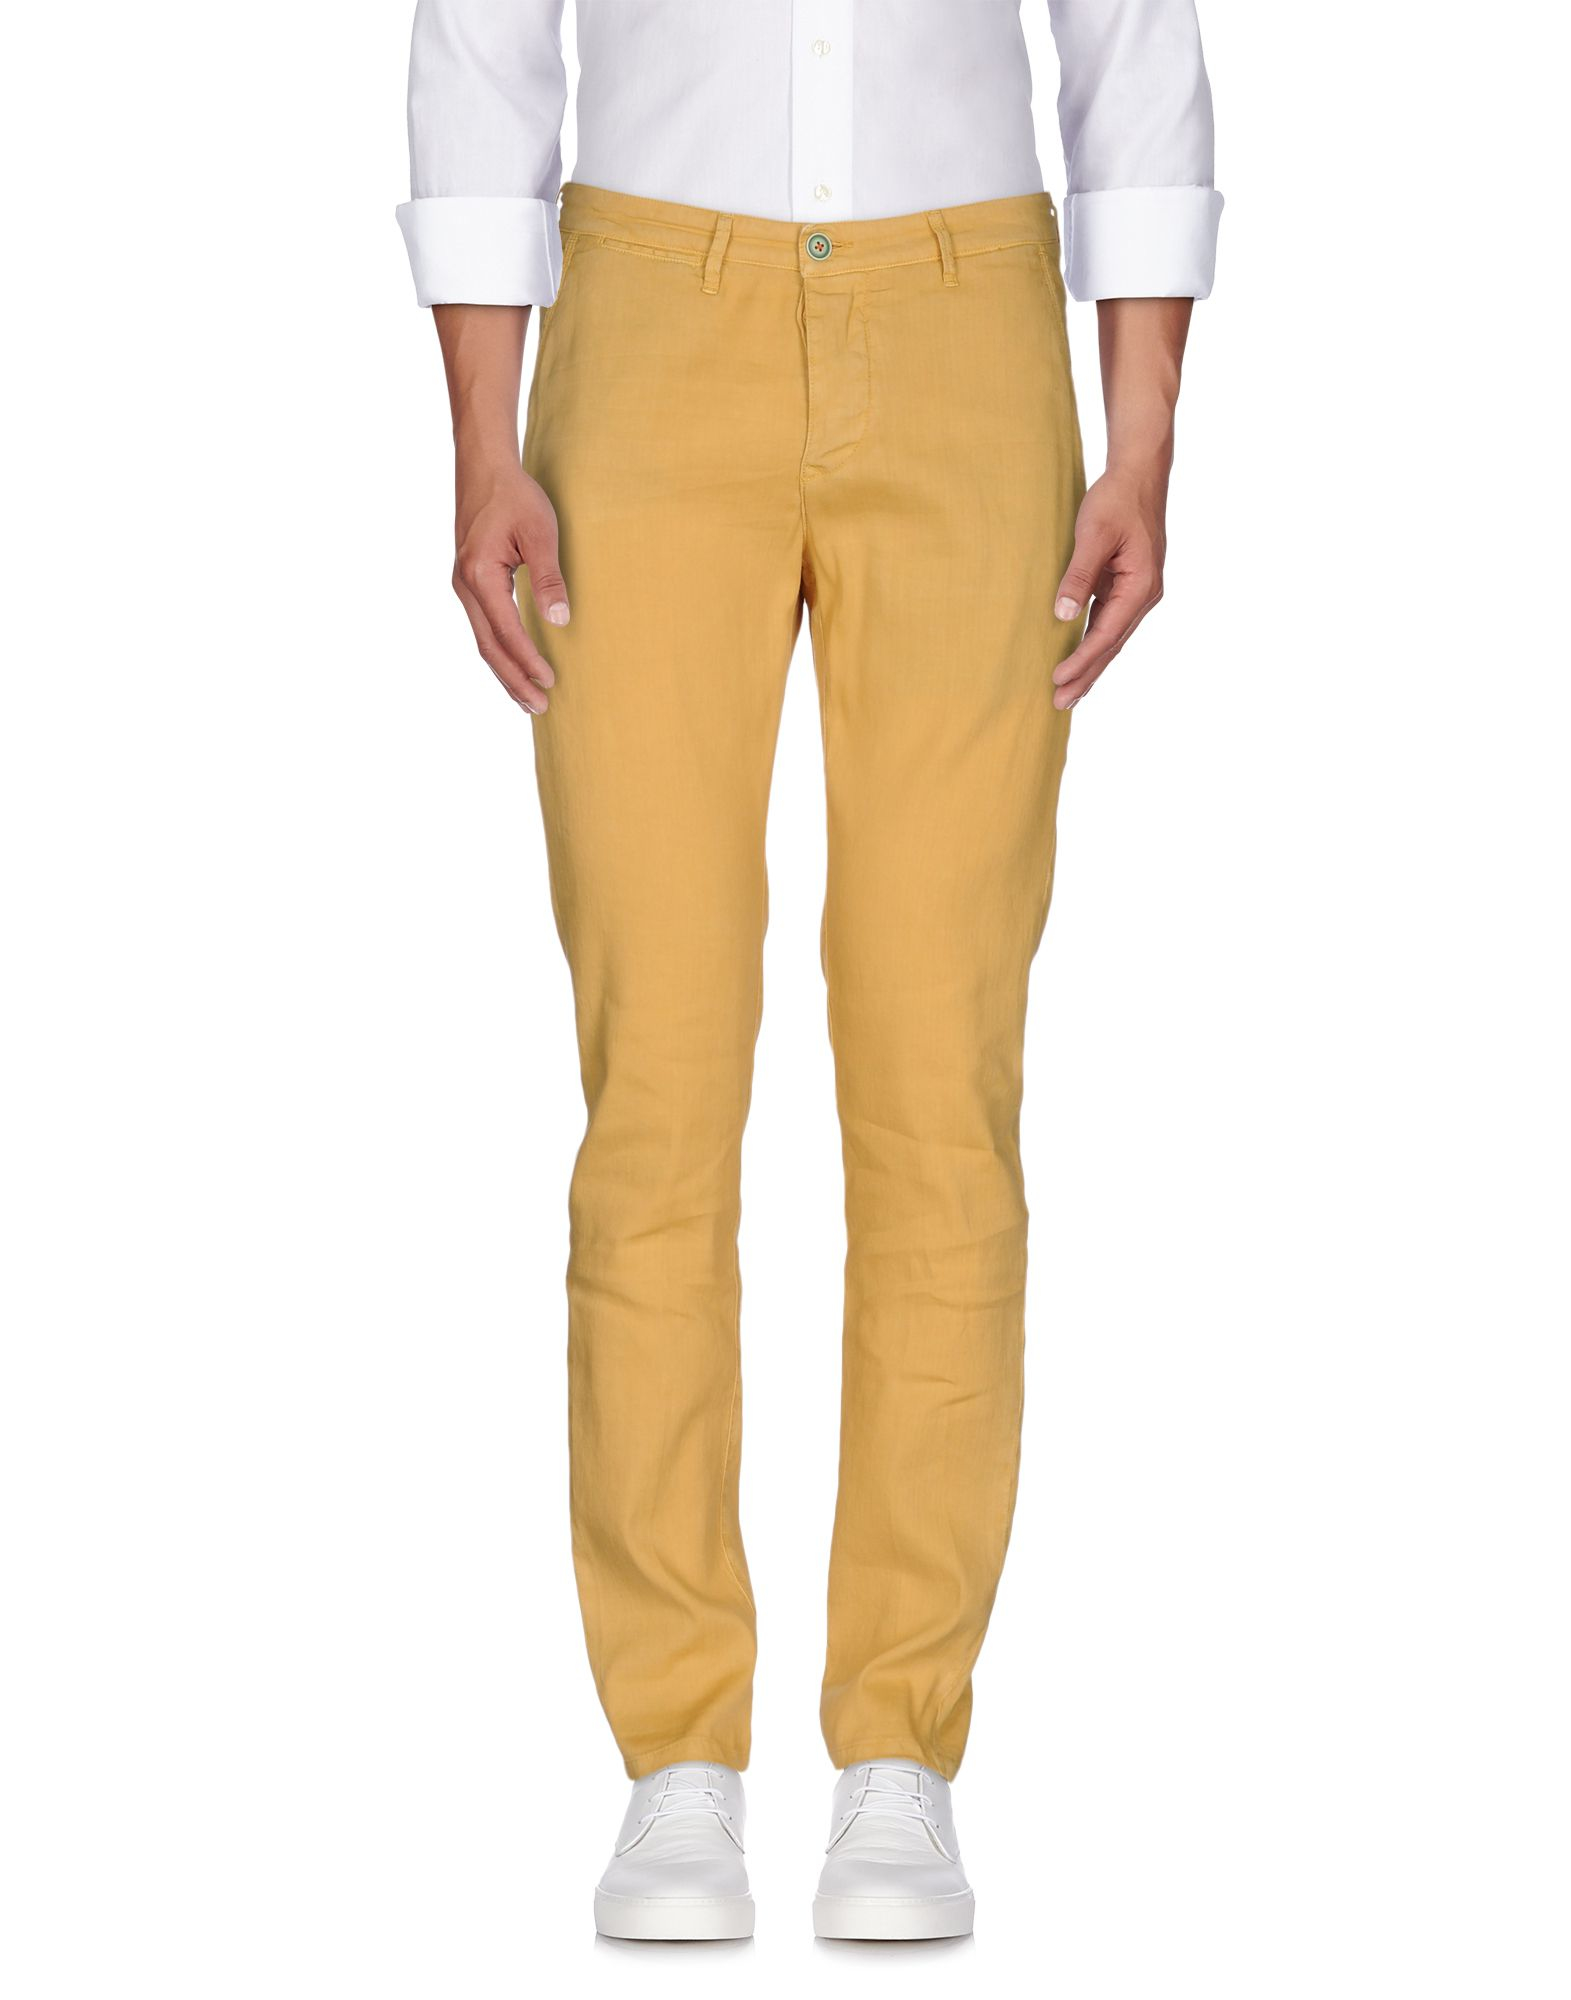 Lyst - 0/Zero Construction Casual Pants in Yellow for Men